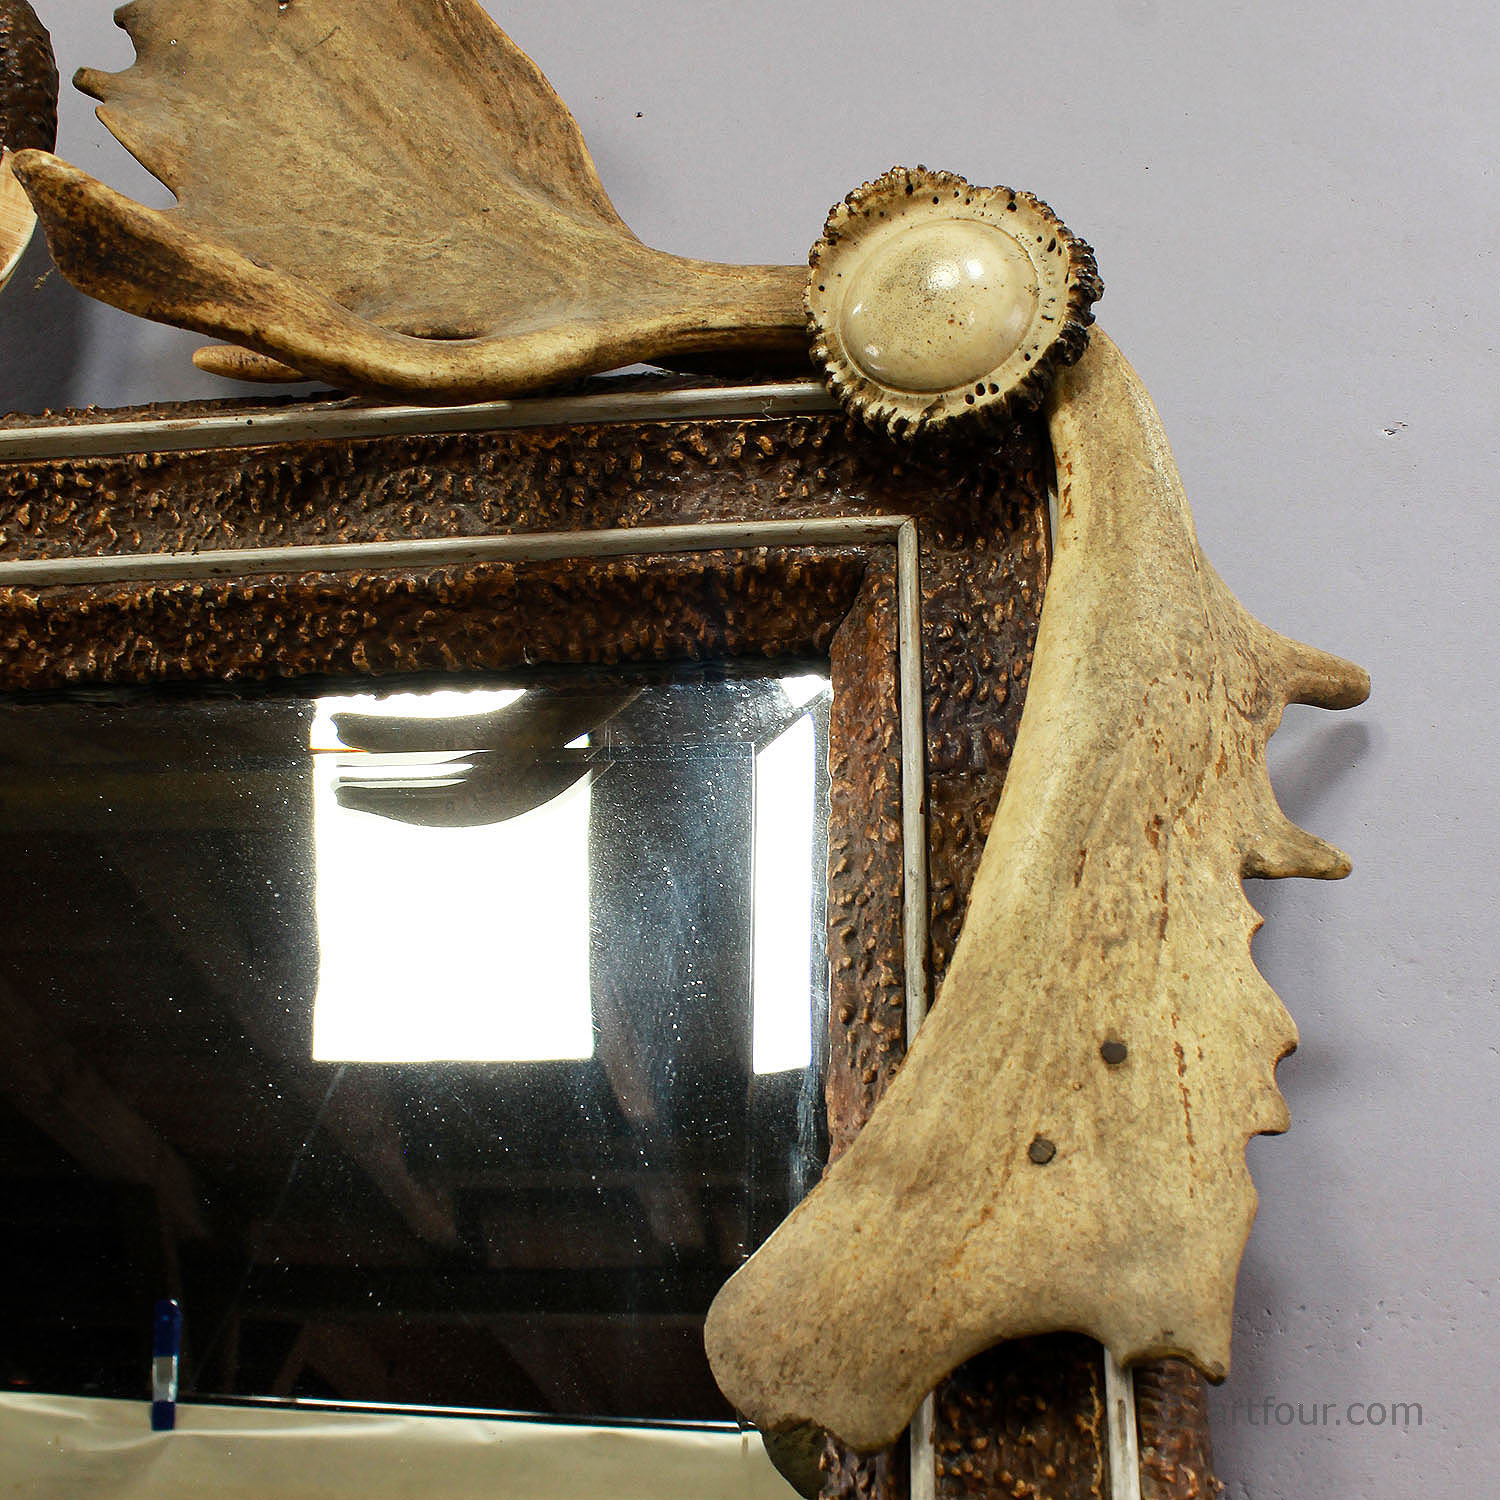 Antique Antler Mirror with Console Table, Austria, ca. 1860